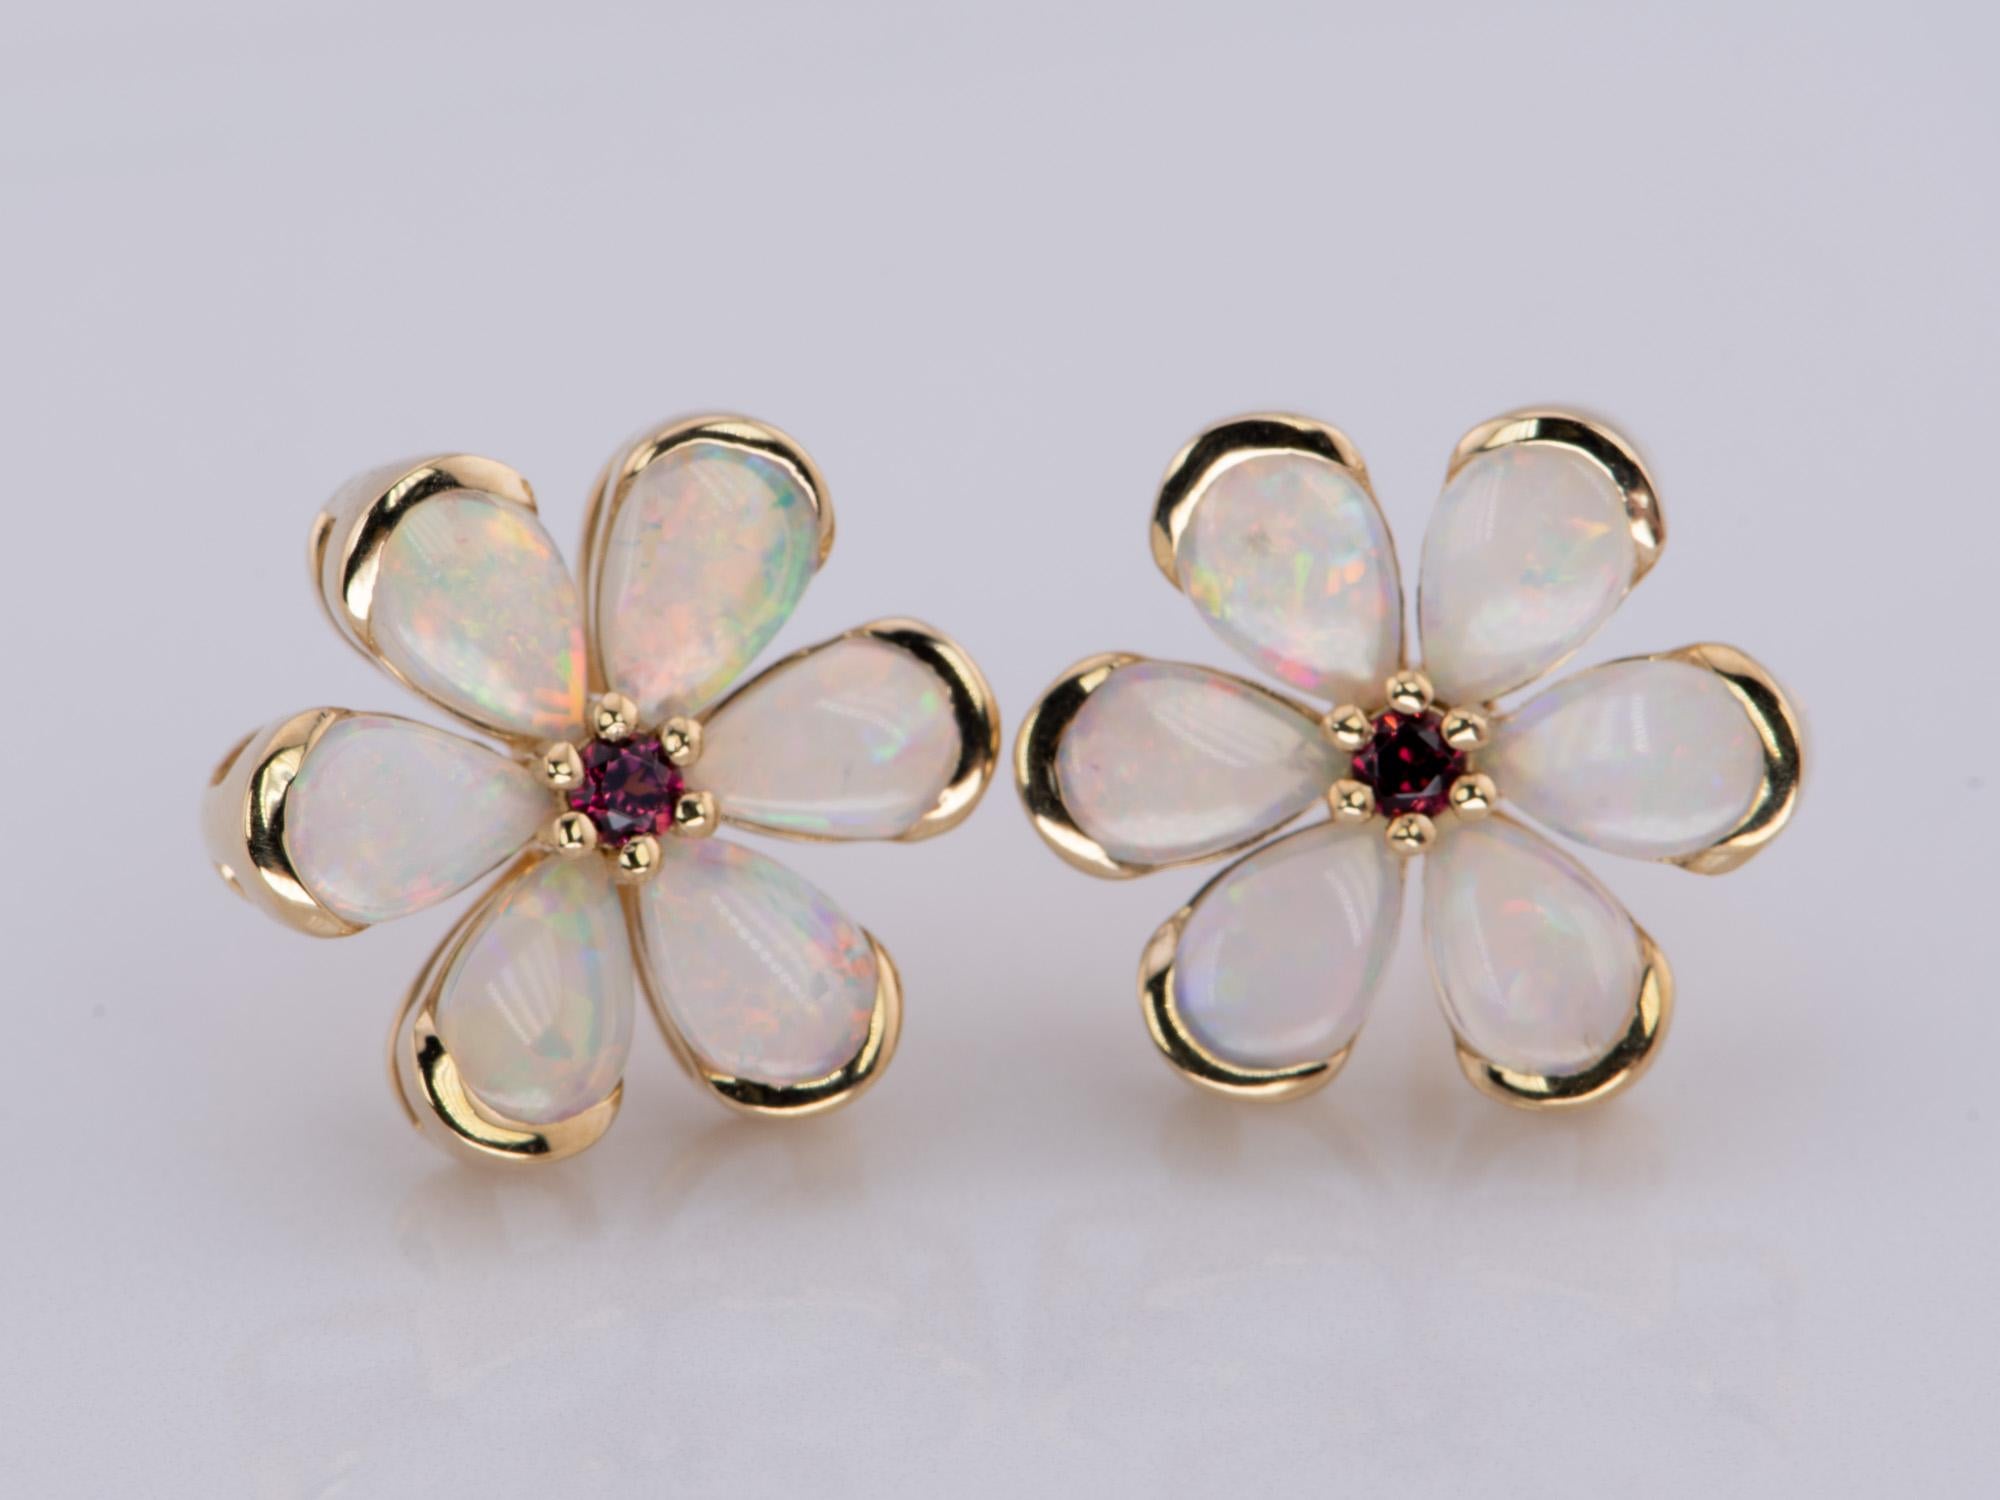 ♥ Solid Australian Opal Floral Style Earrings with Garnet Center 14K Gold
♥ The item measures 14mm in length, 15.2mm in width, and 4.7mm in height.
♥ Material: 14K Yellow Gold
♥ Gemstone: Opal, garnet
♥ All stone(s) used are genuine, earth-mined,